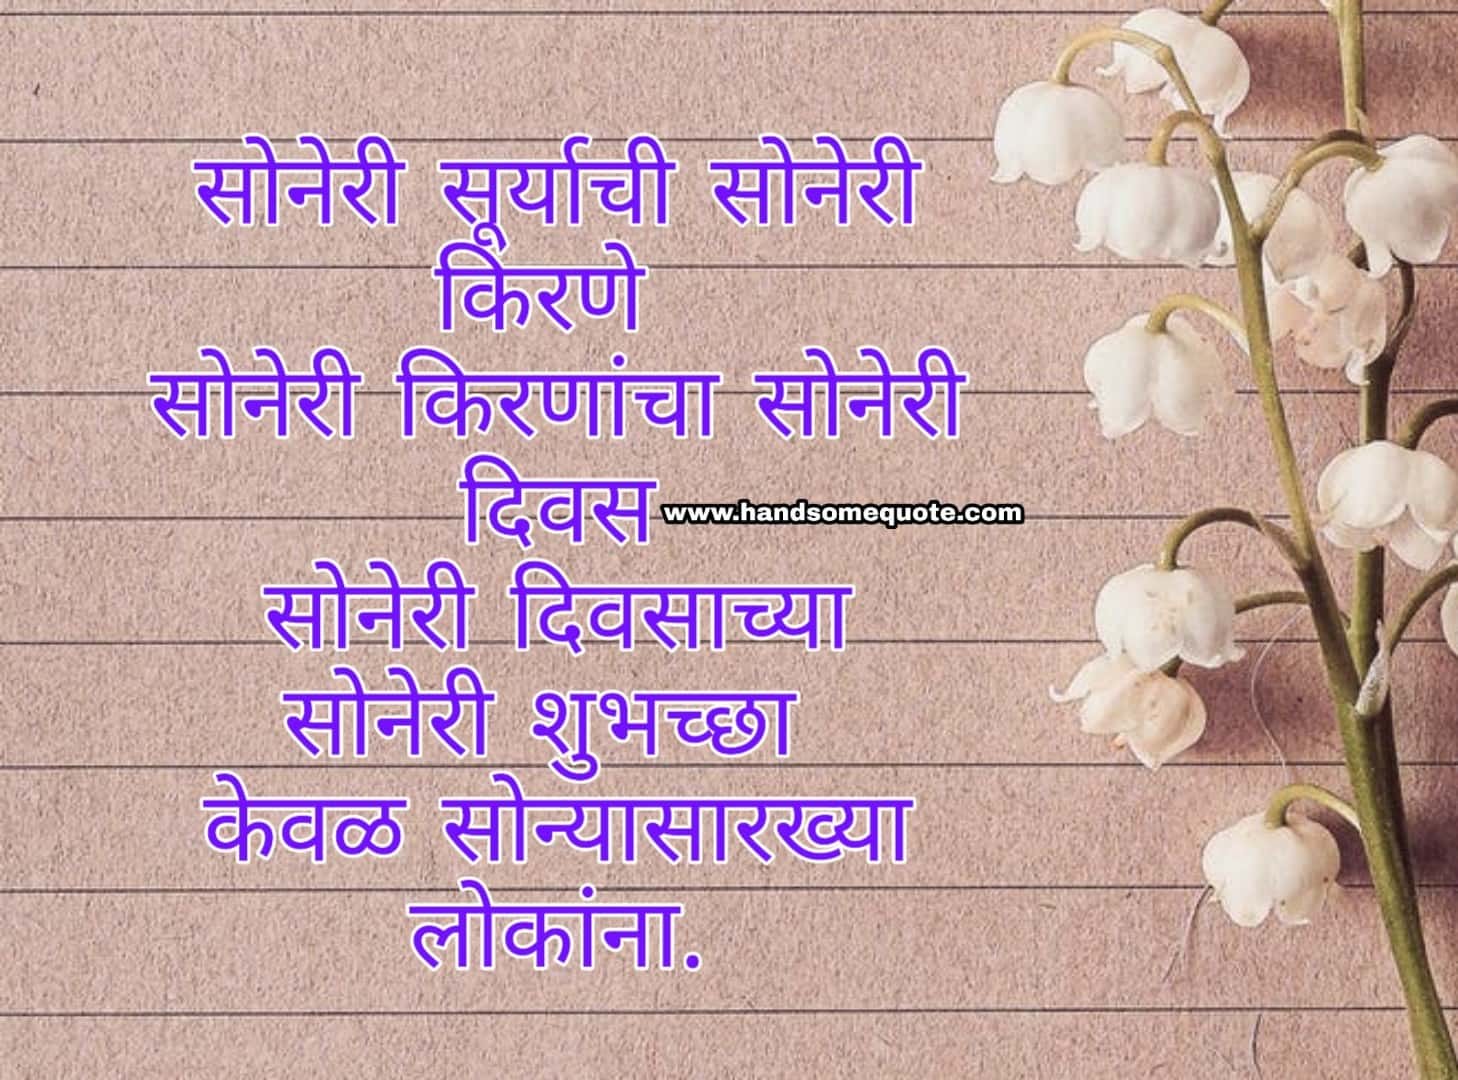 Good Morning Messages In Marathi Sms Wishes Suvichar